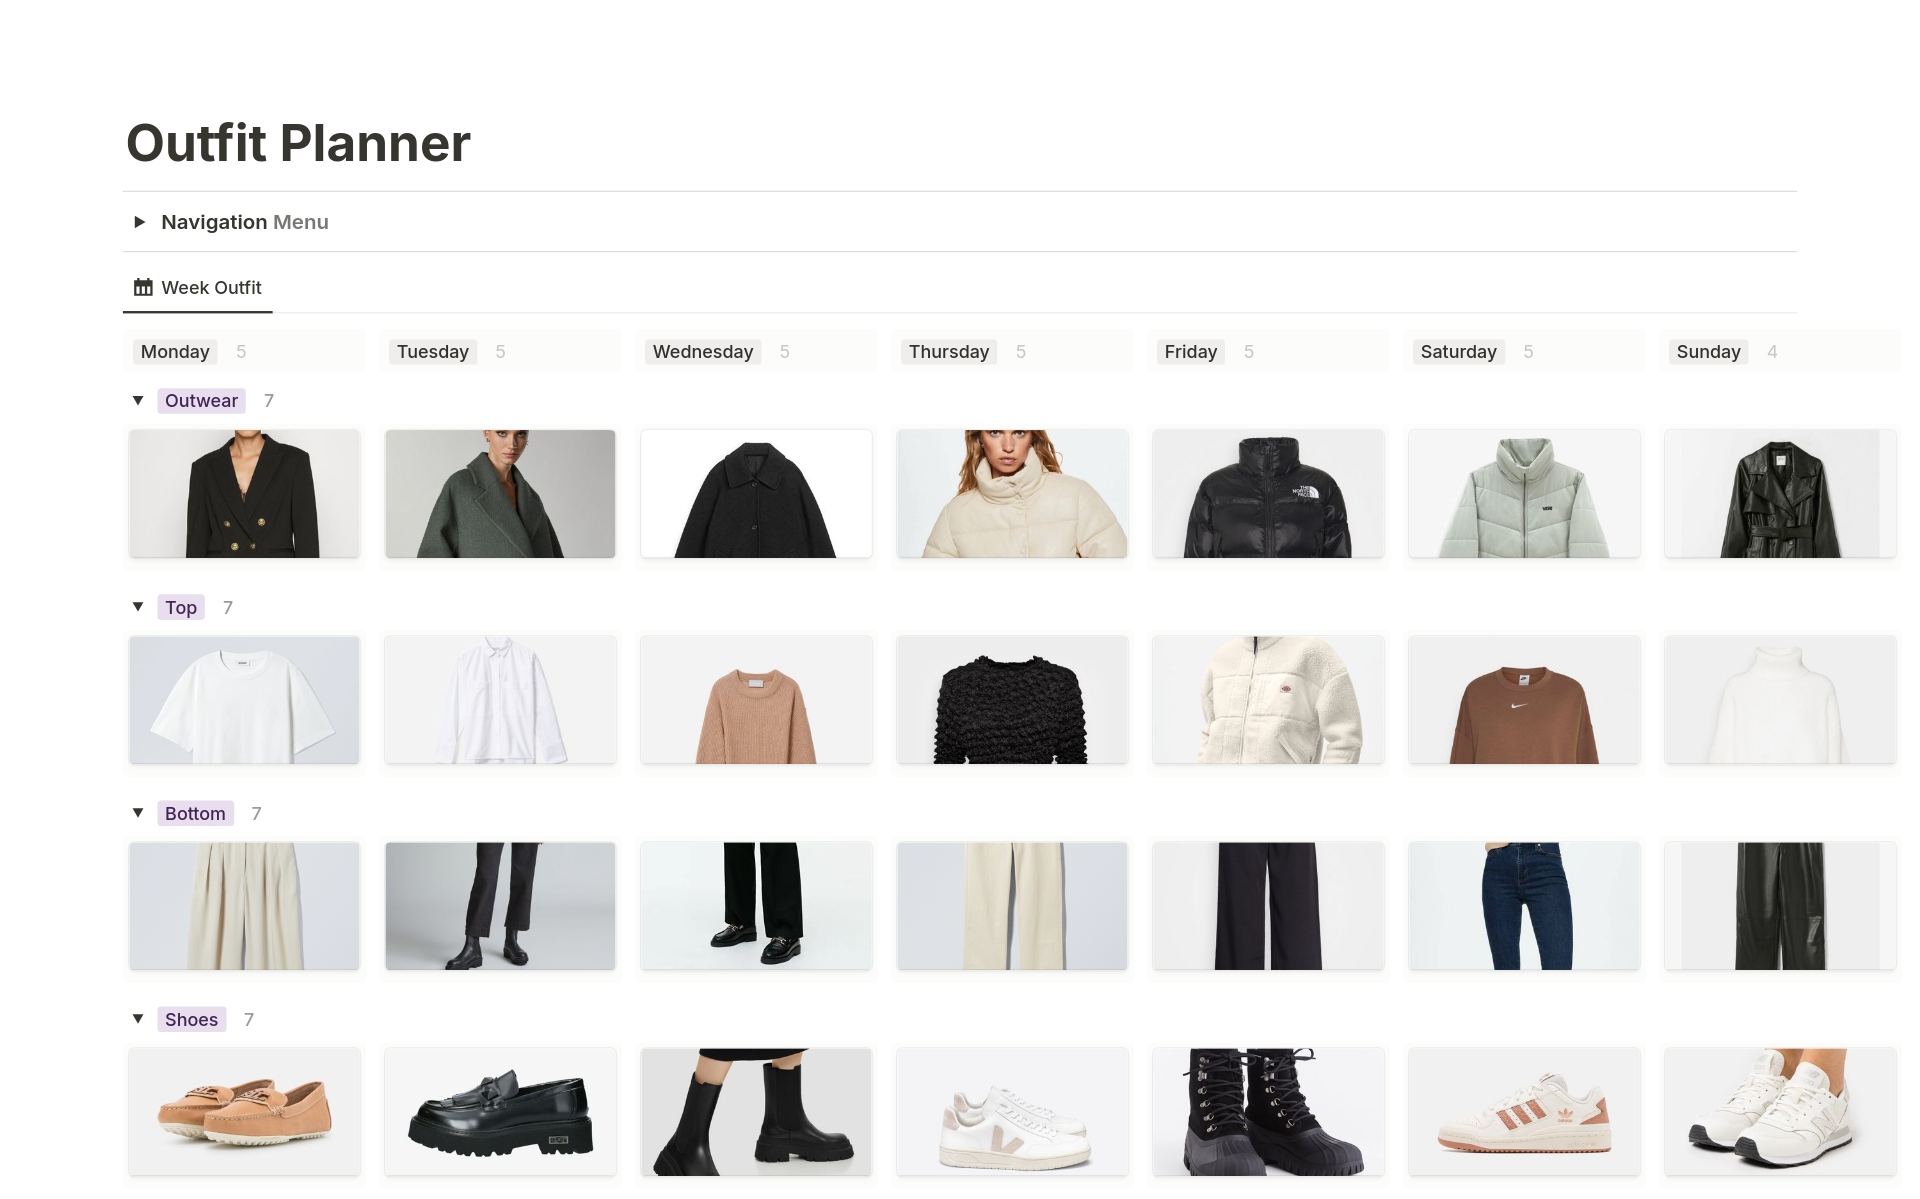 Make the most out of your closet. Say goodbye to cluttered closets and hello to a sleek and organized wardrobe that you'll love. With the Ultimate Outfit Planner, you can now digitally catalog all of your clothing items, making it easier than ever to find your favorite outfits an